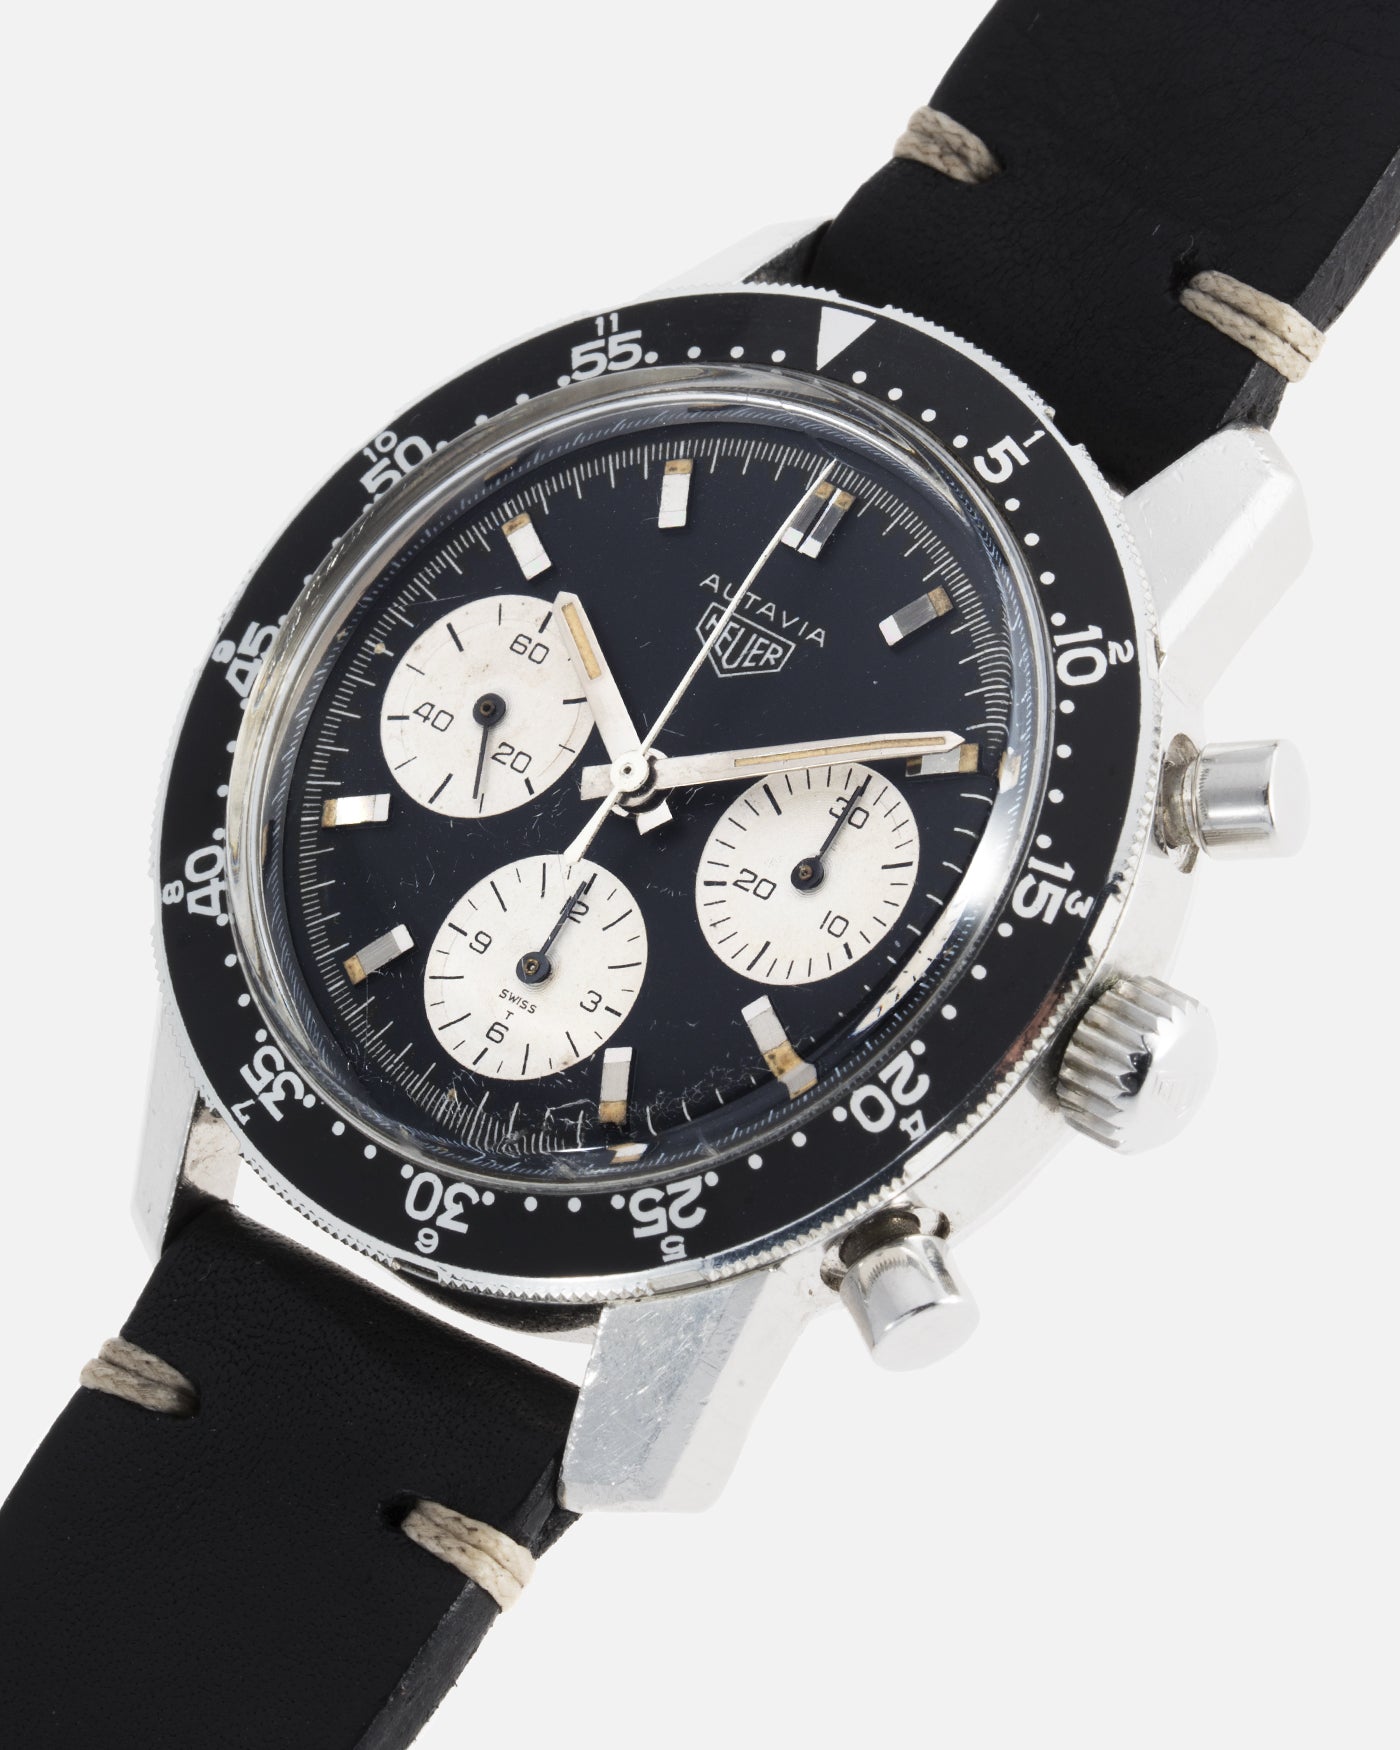 Heuer Autavia 2446C Vintage Chronograph Watch | S.Song Vintage Watches ...